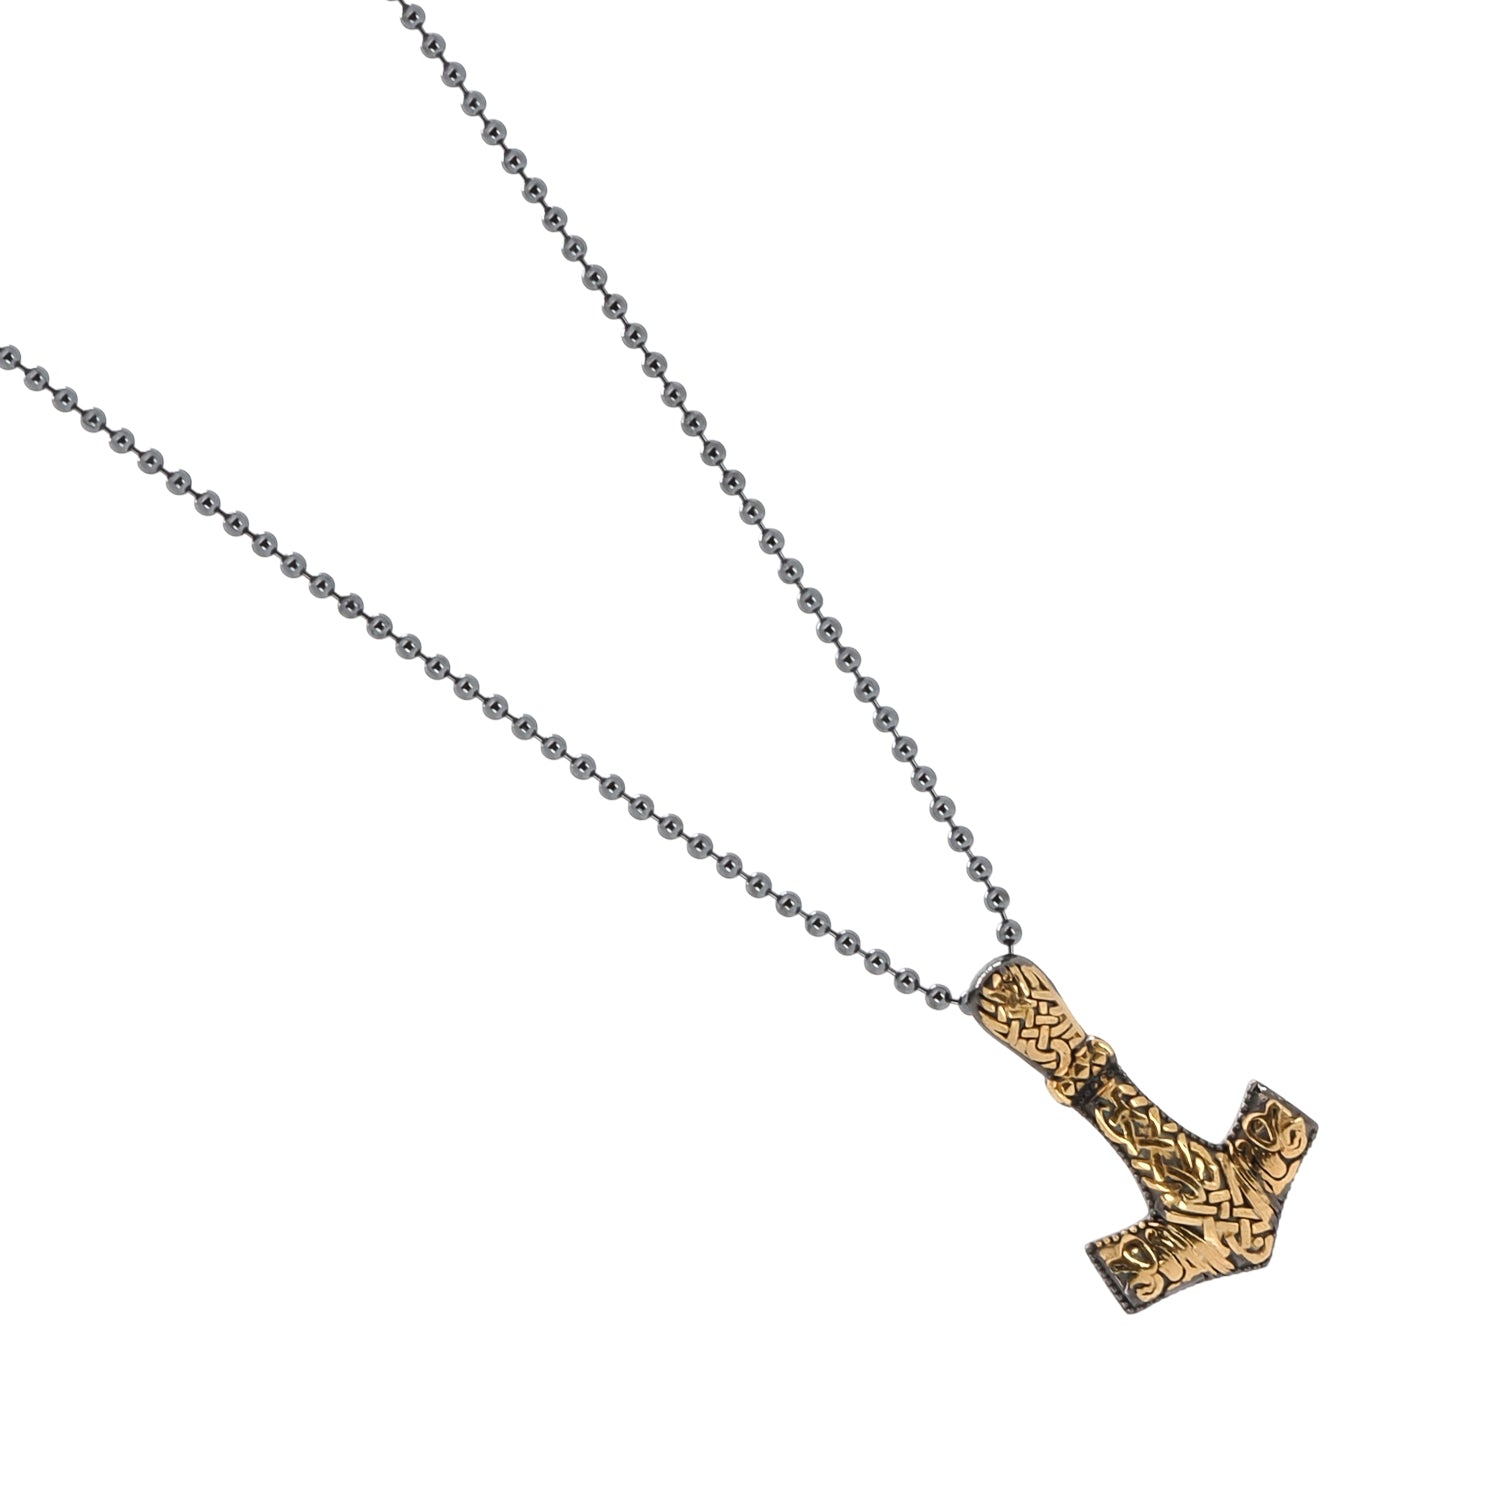 Wield the power: Thor Hammer Sterling Silver Necklace on display